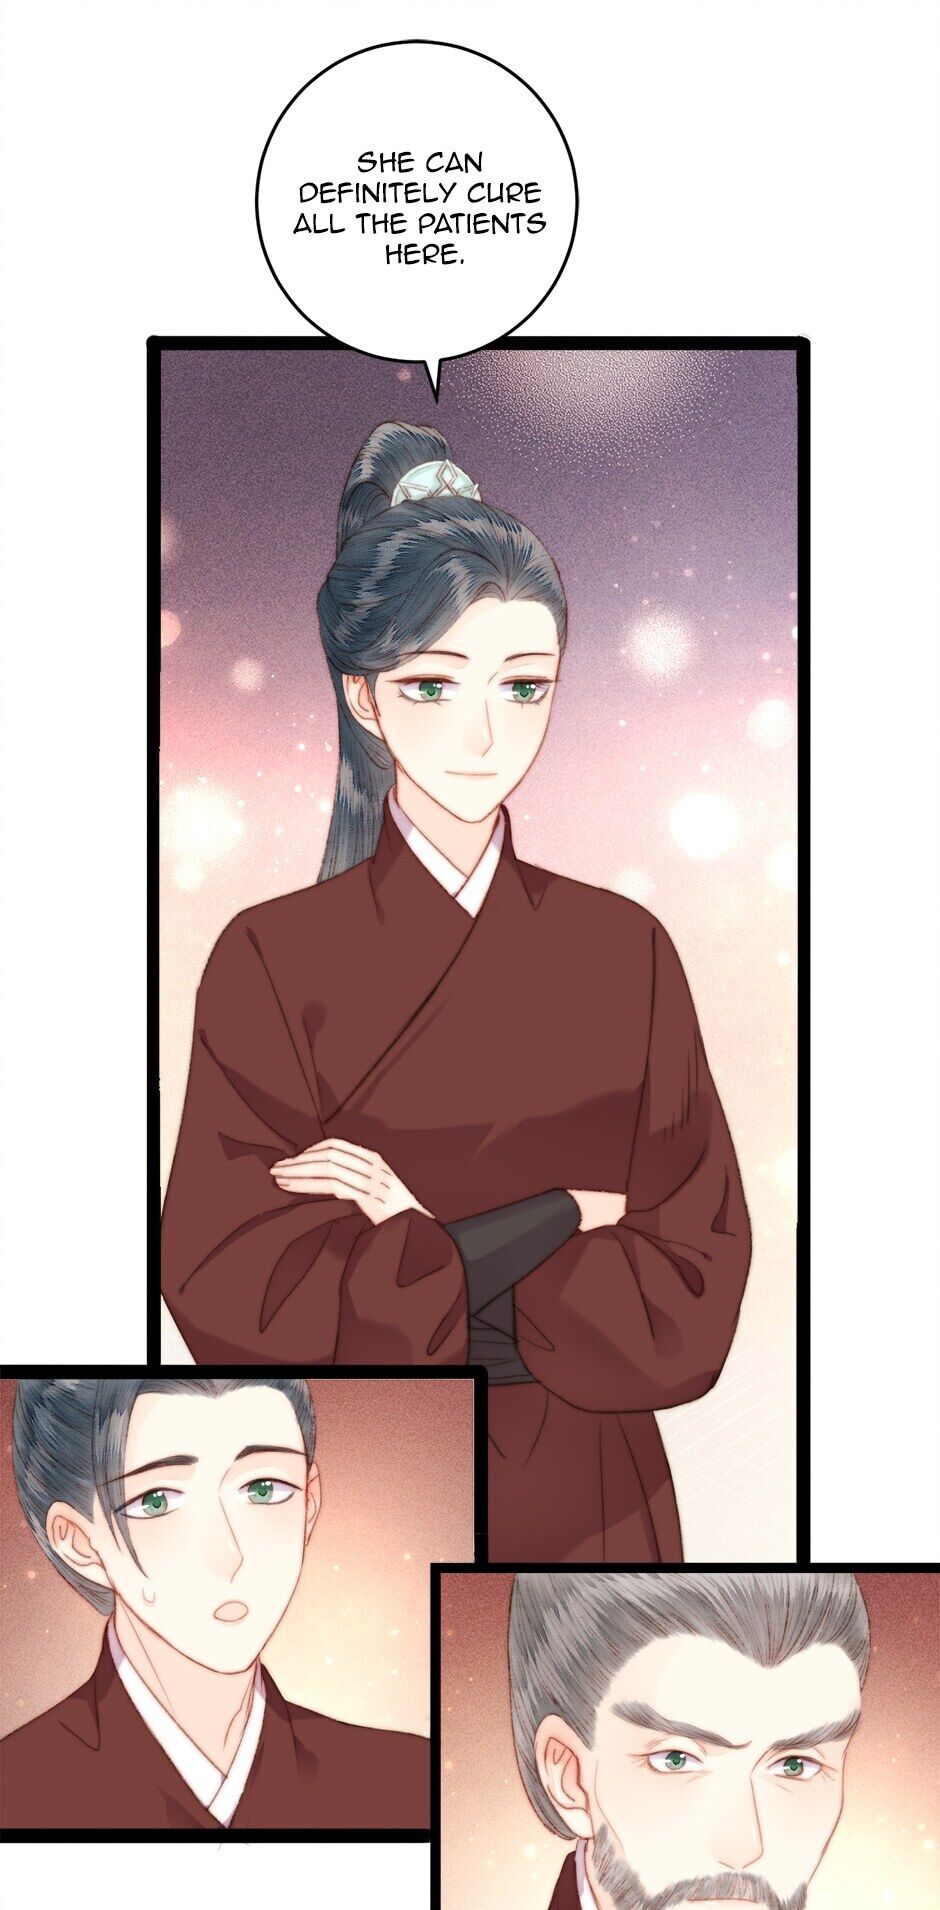 The Goddess of Healing chapter 141